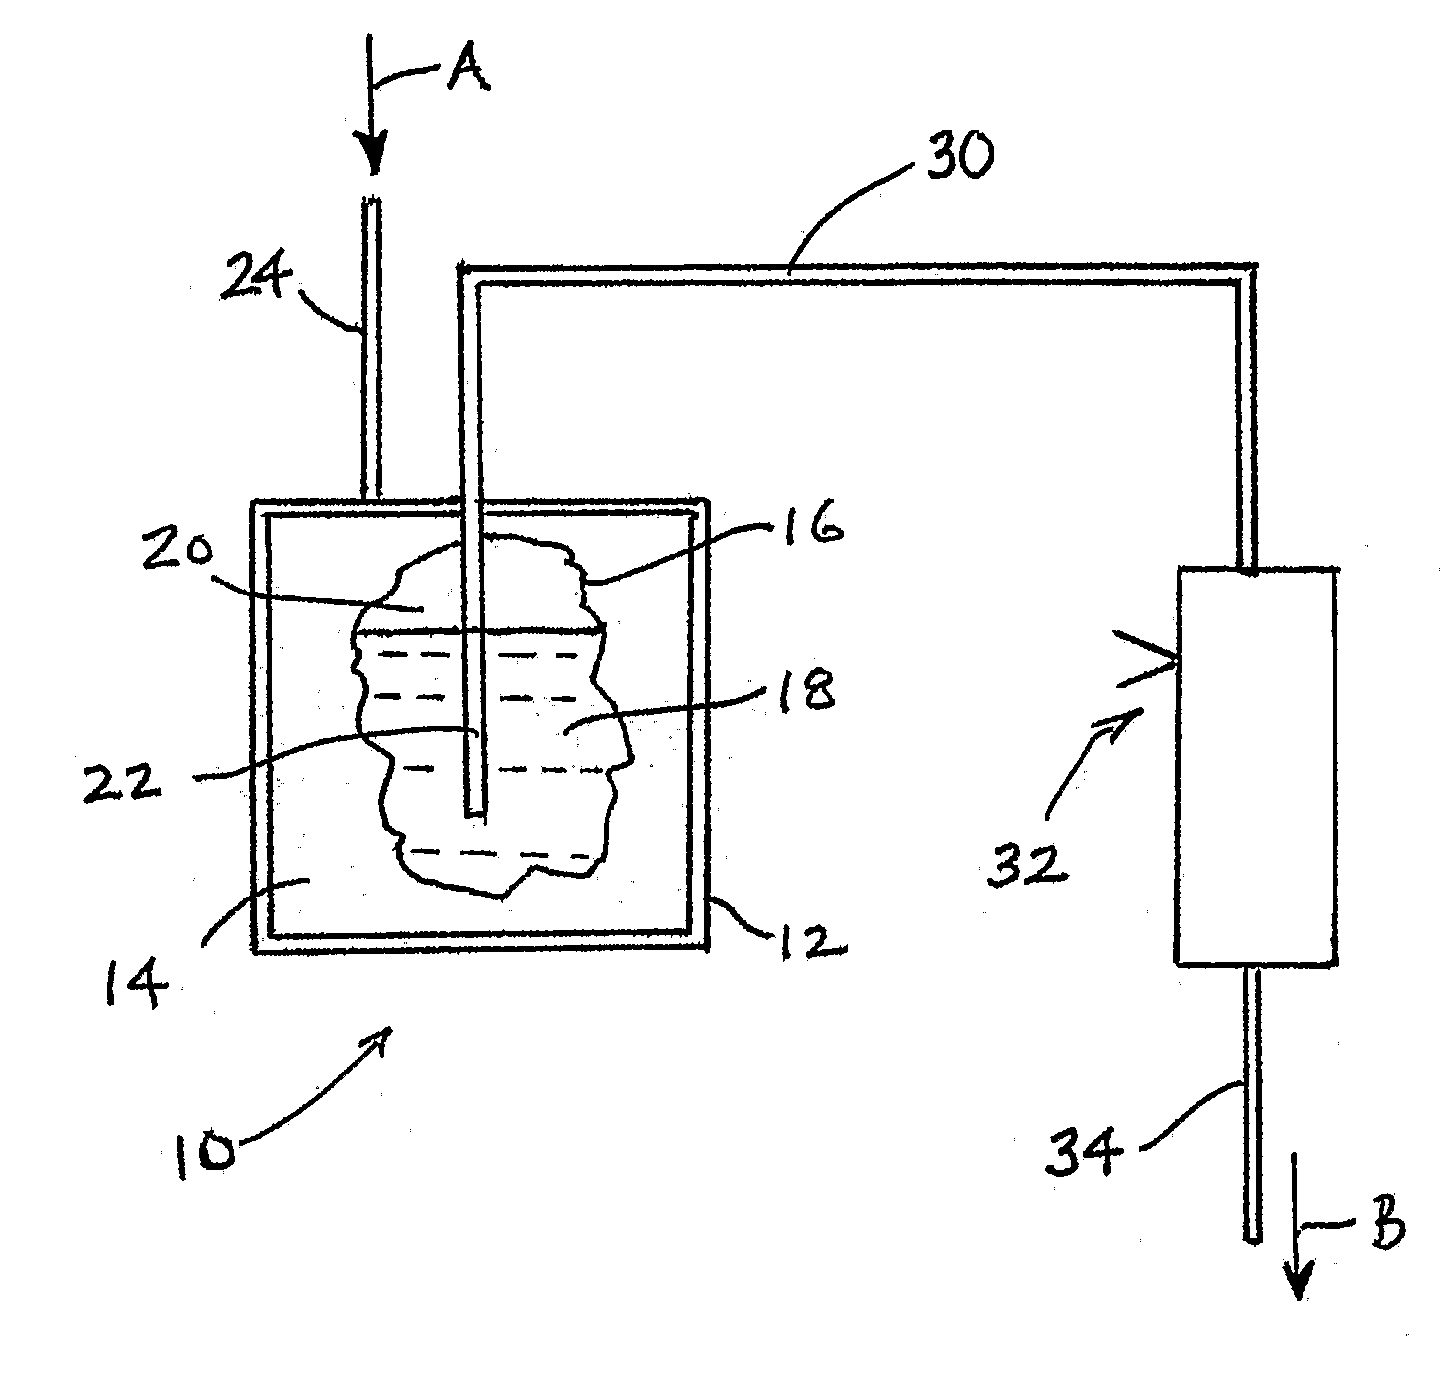 Liner-based liquid storage and dispensing systems with empty detection capability